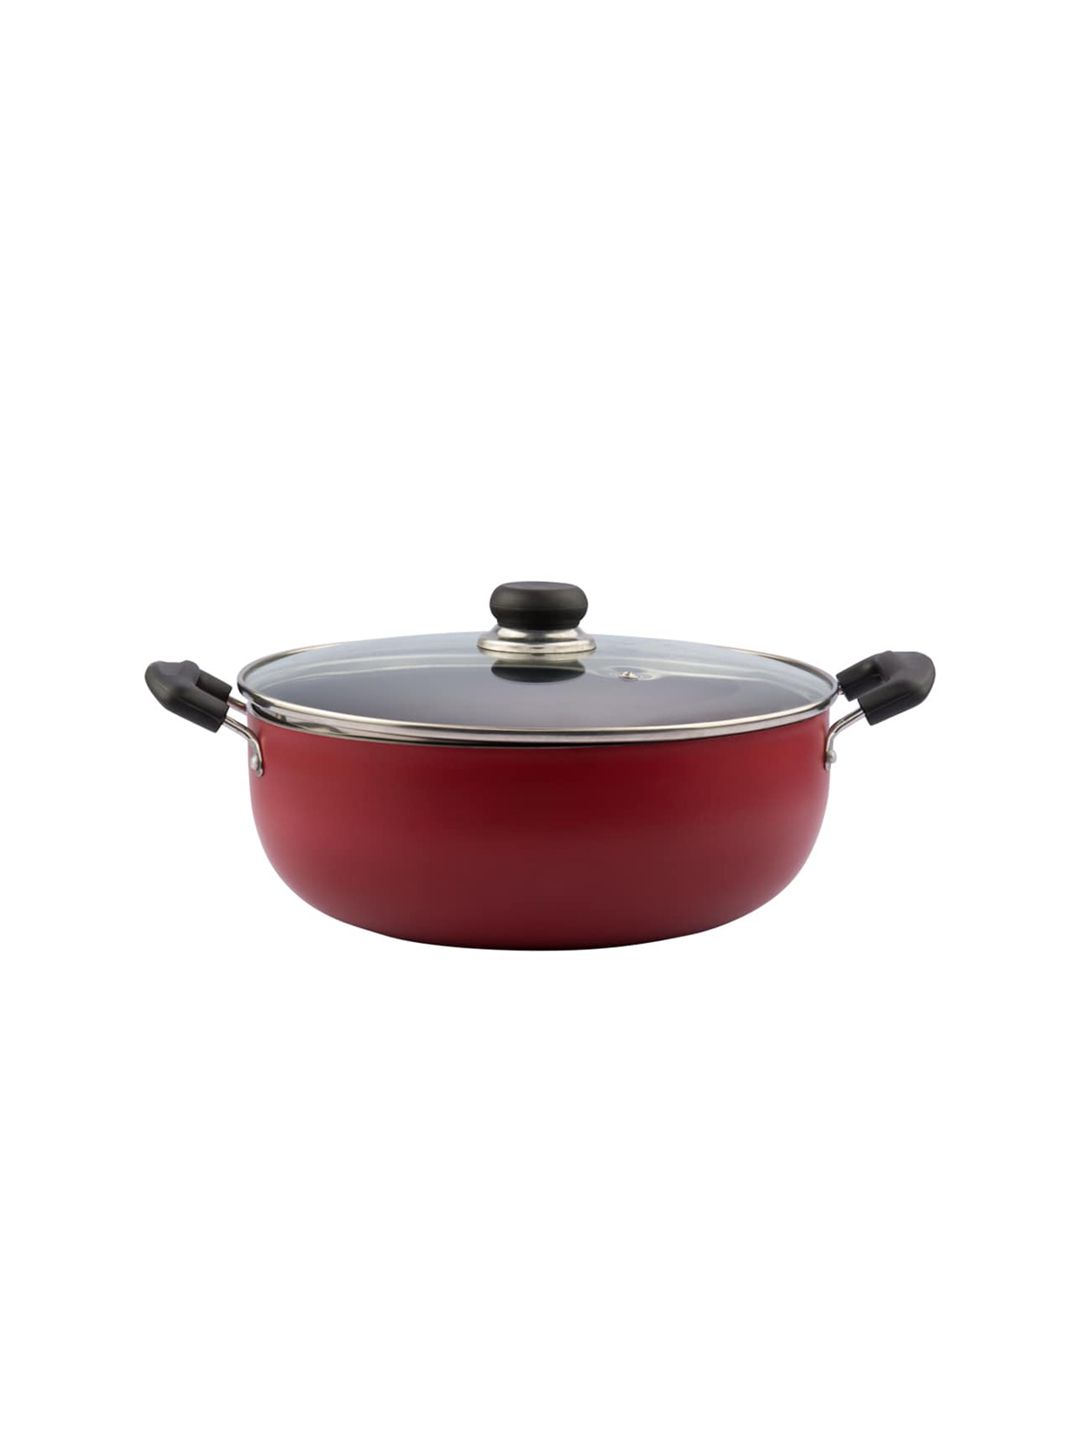 Vinod Red & Black Solid Non-Stick Induction Base Kadhai with Lid 3.4 Ltr Price in India